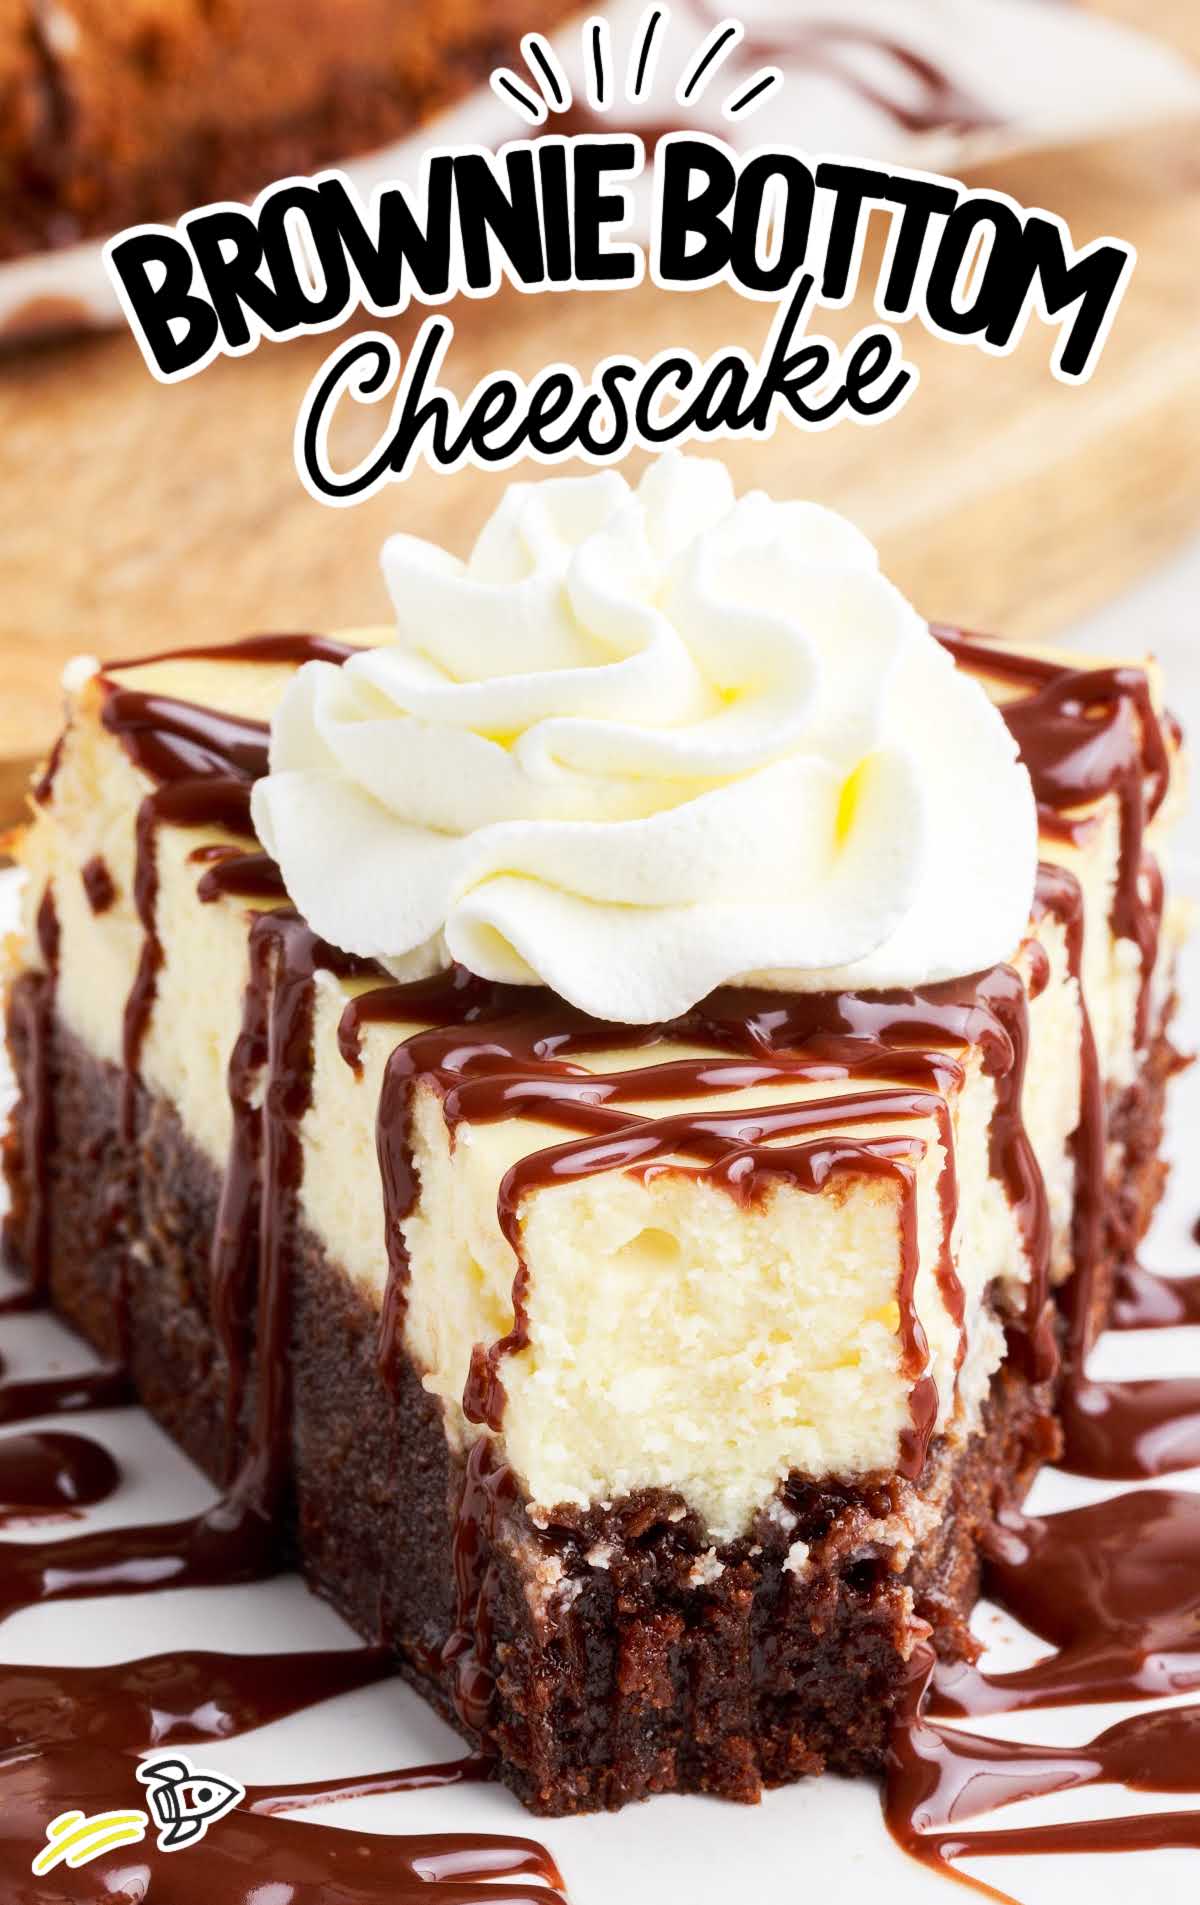 a slice of Brownie Bottom Cheesecake drizzled with chocolate fudge topped with whipped cream